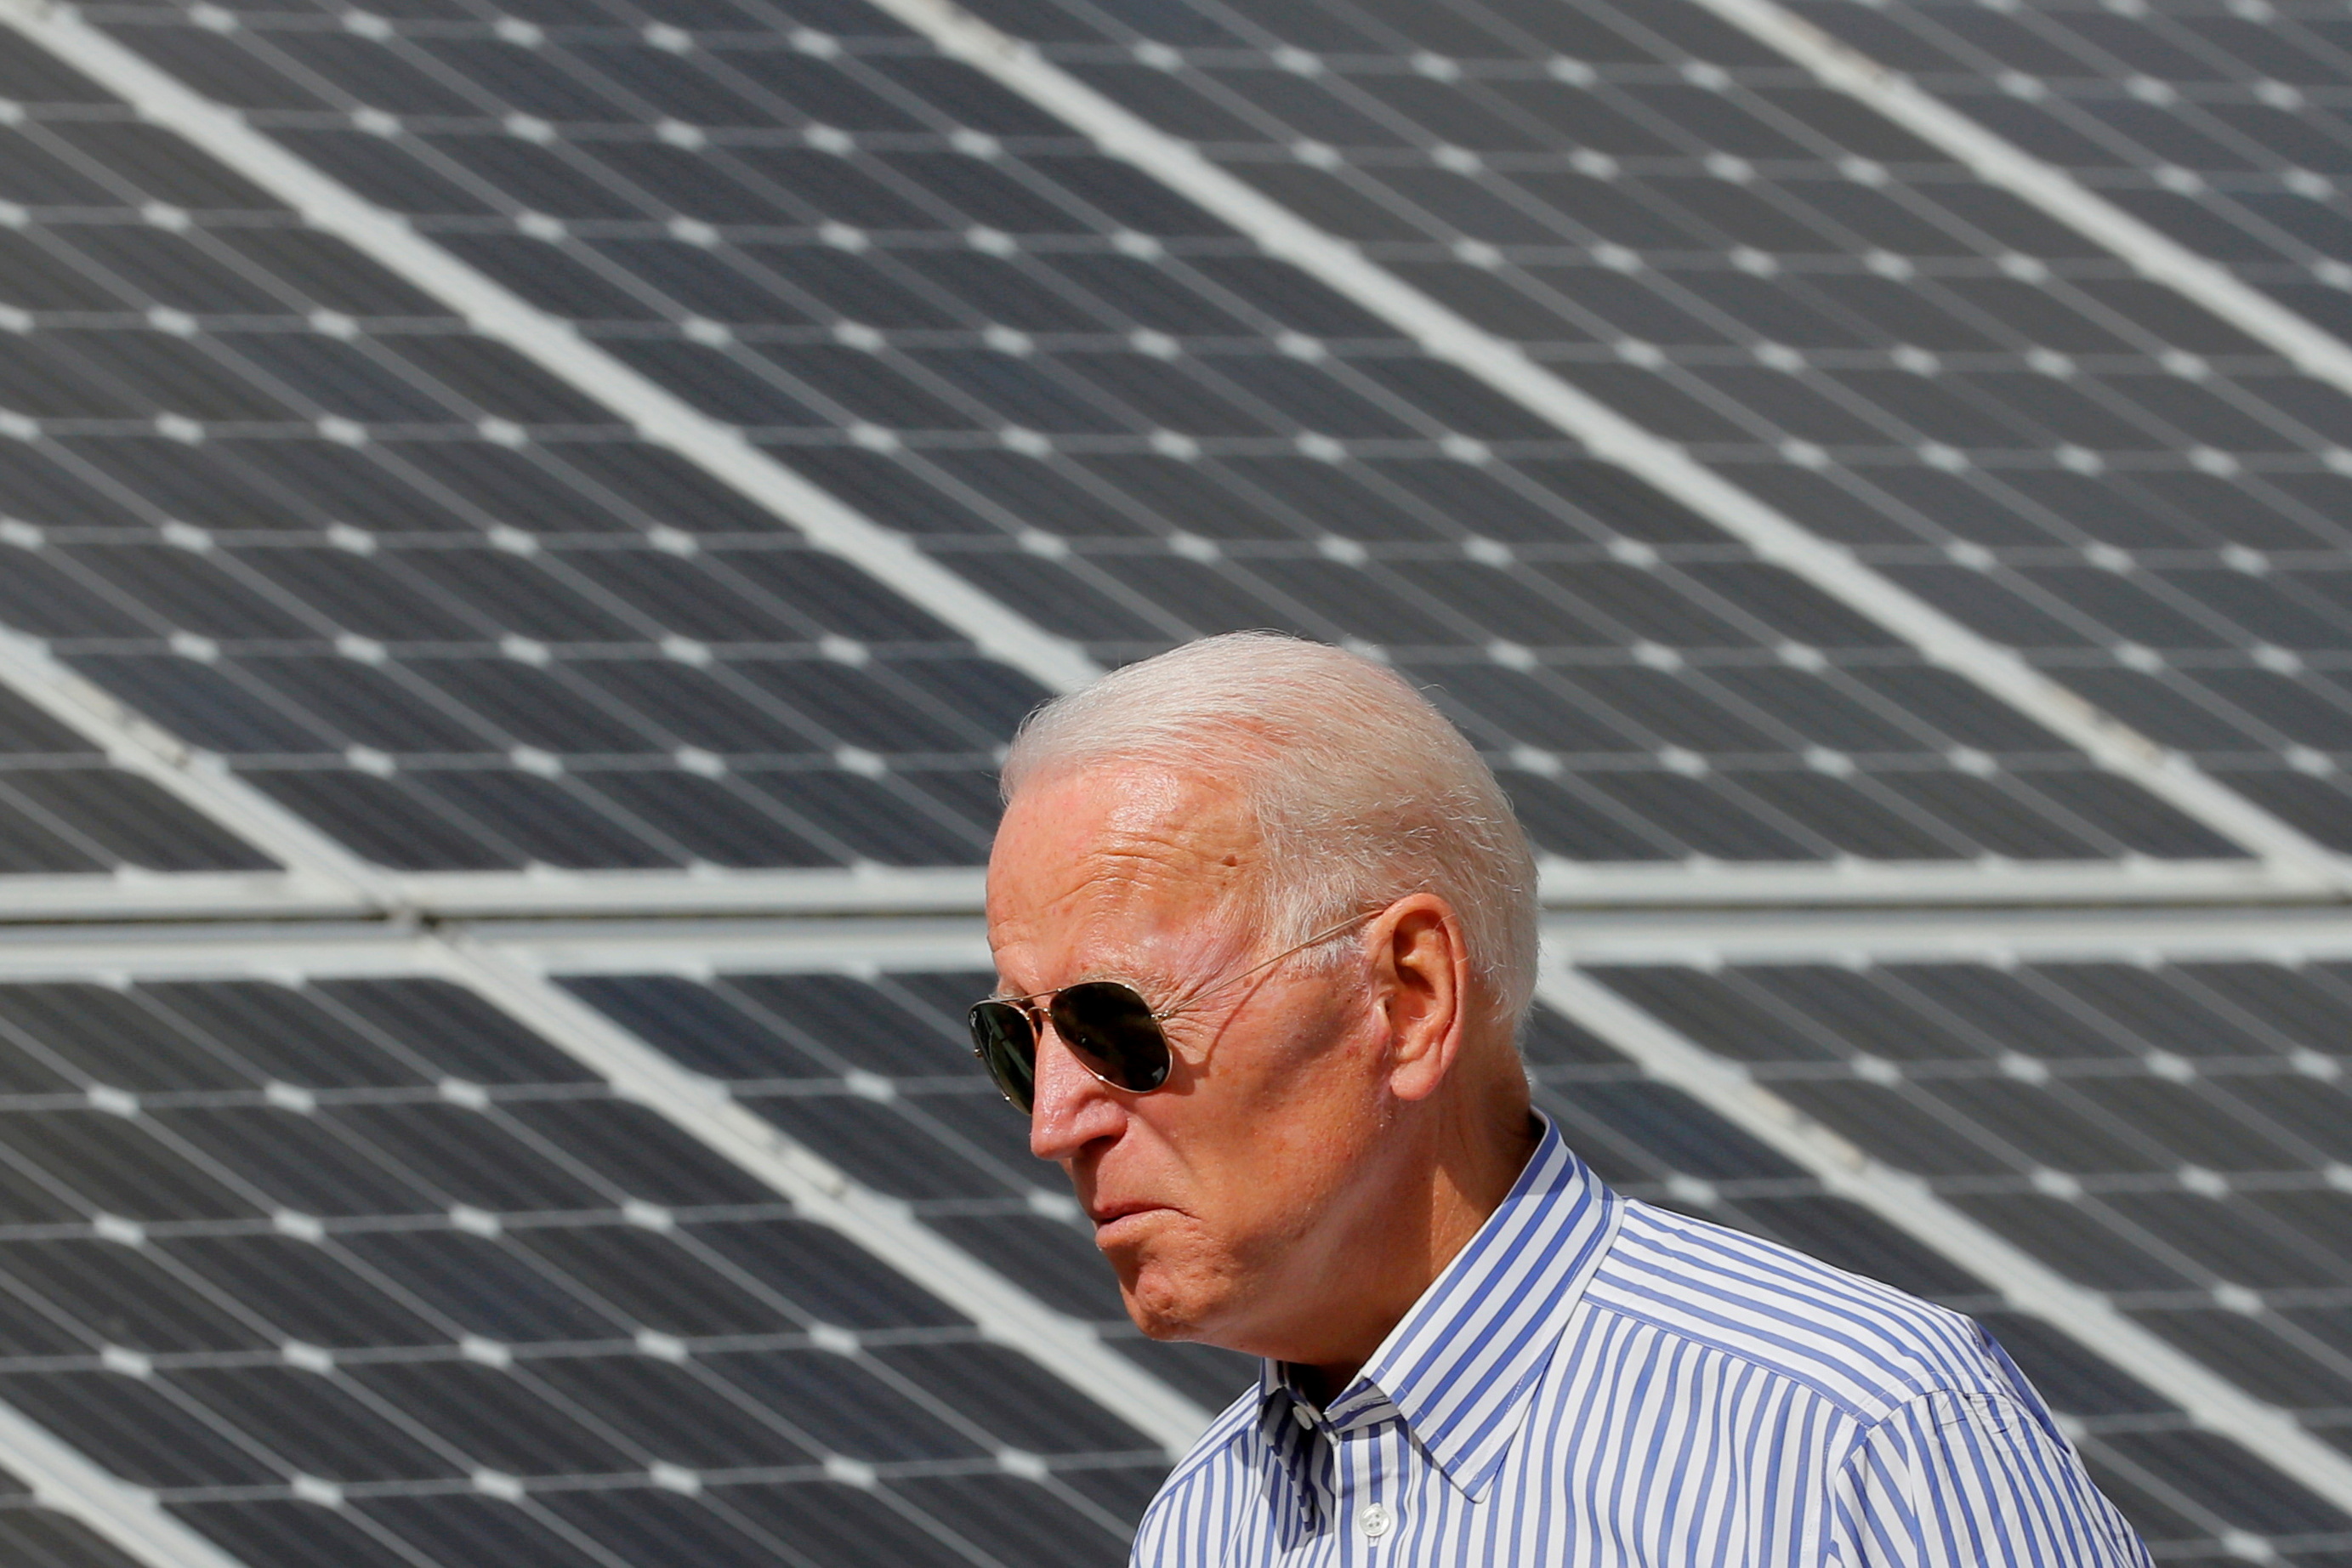 Biden’s climate leadership hinges on mobilising private finance